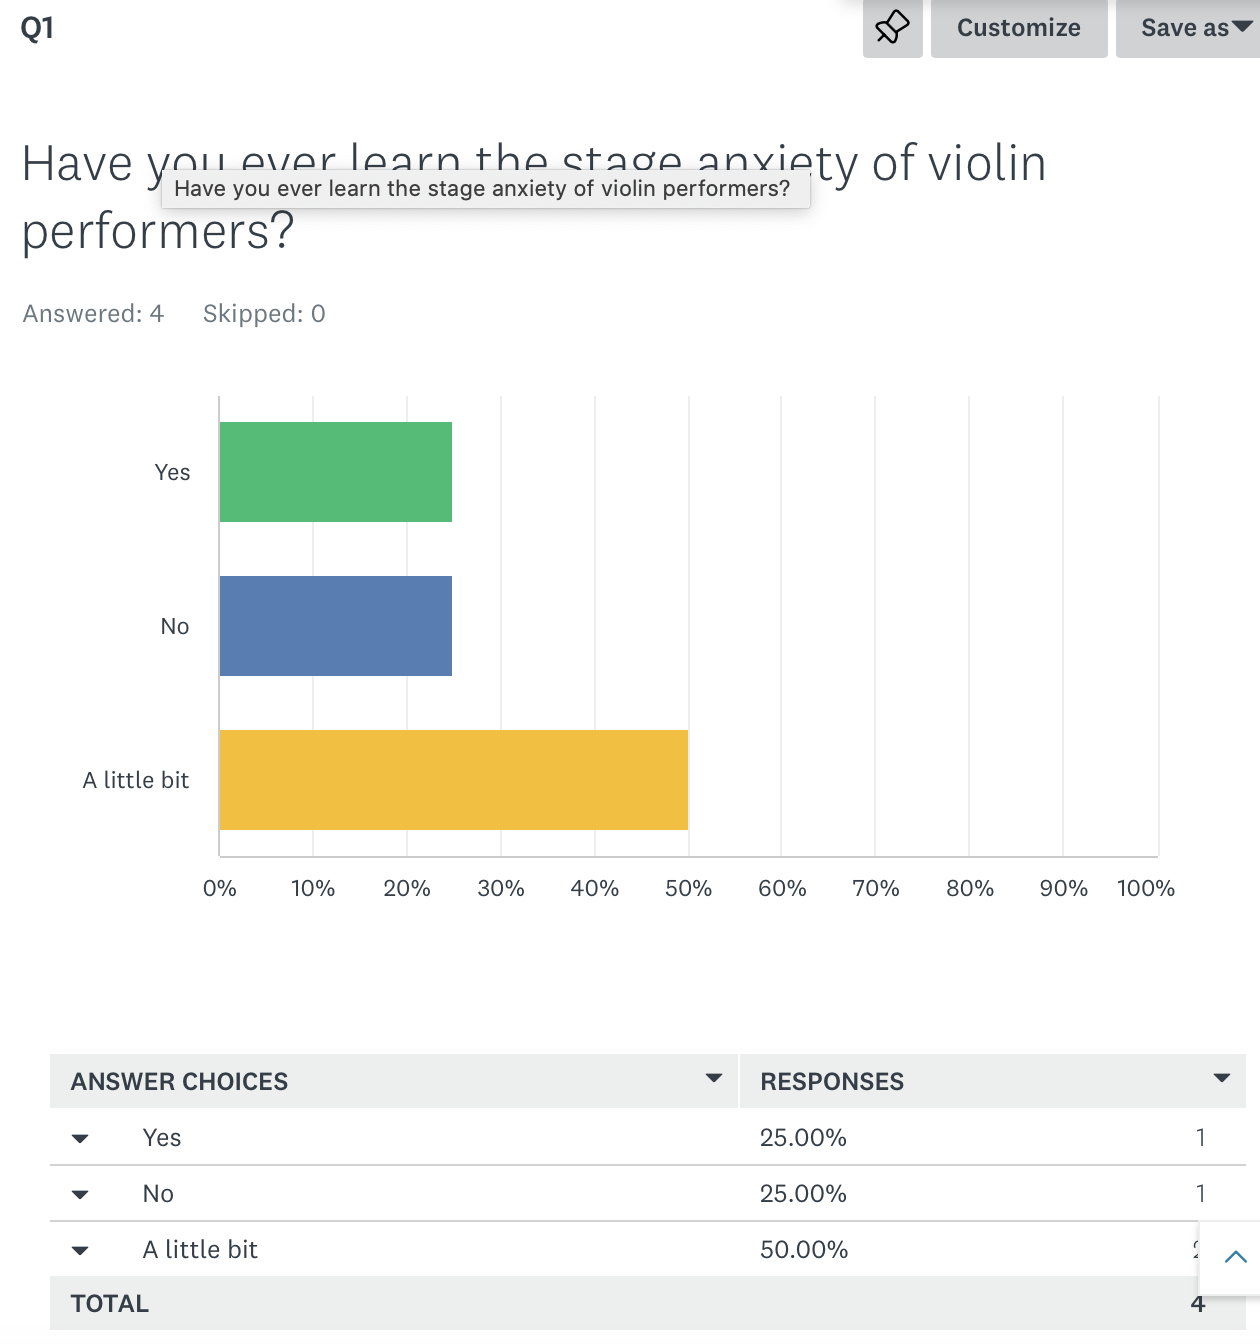 Have you ever learn the stage anxiety of violin performers